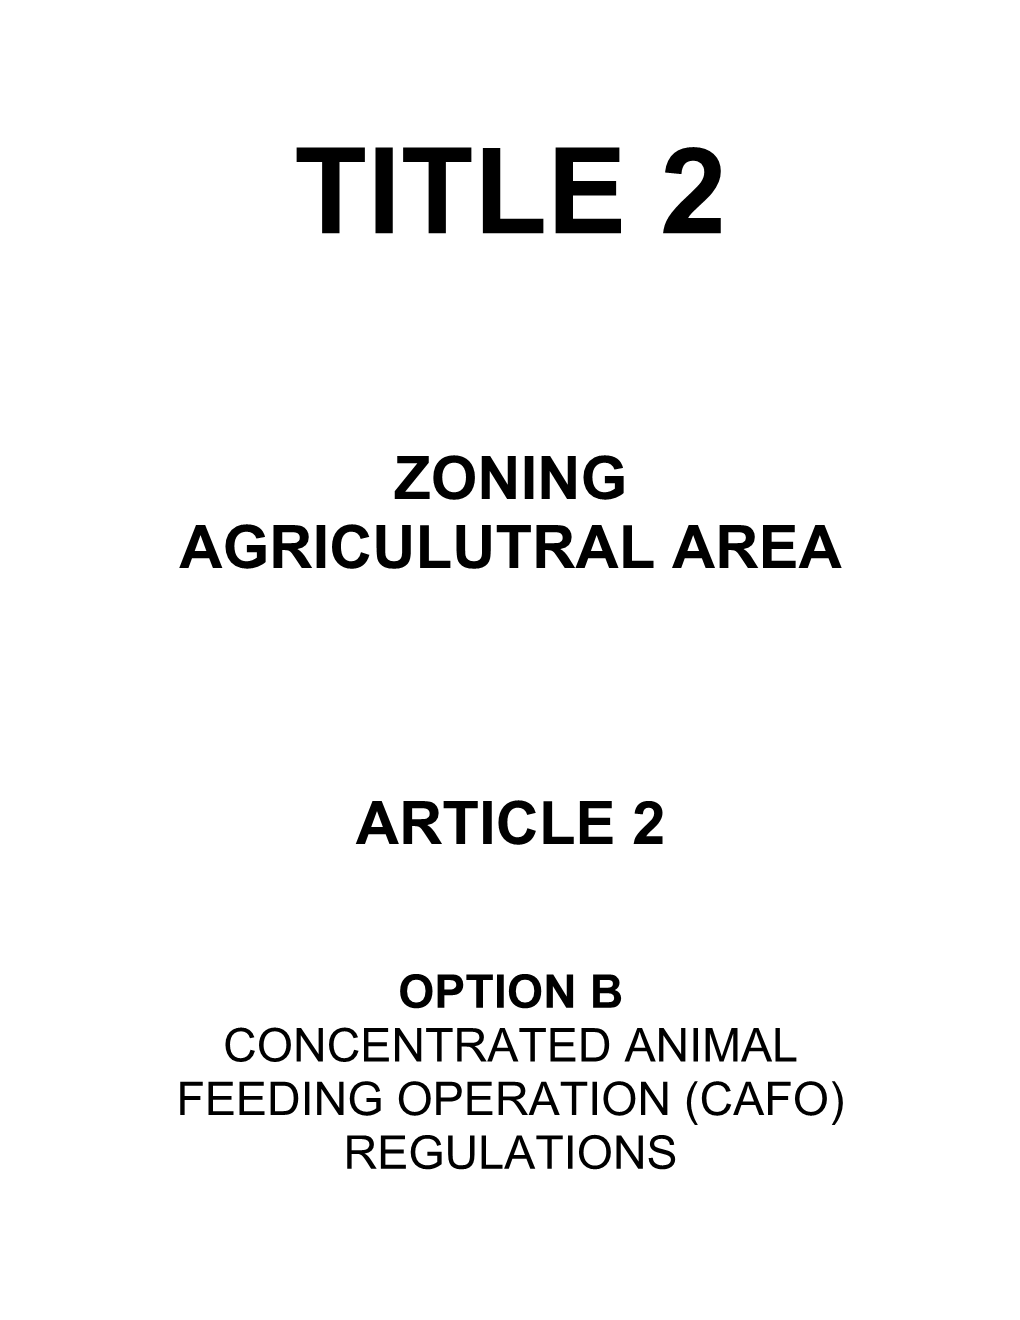 Concentrated Animal Feeding Operation (Cafo) Regulations